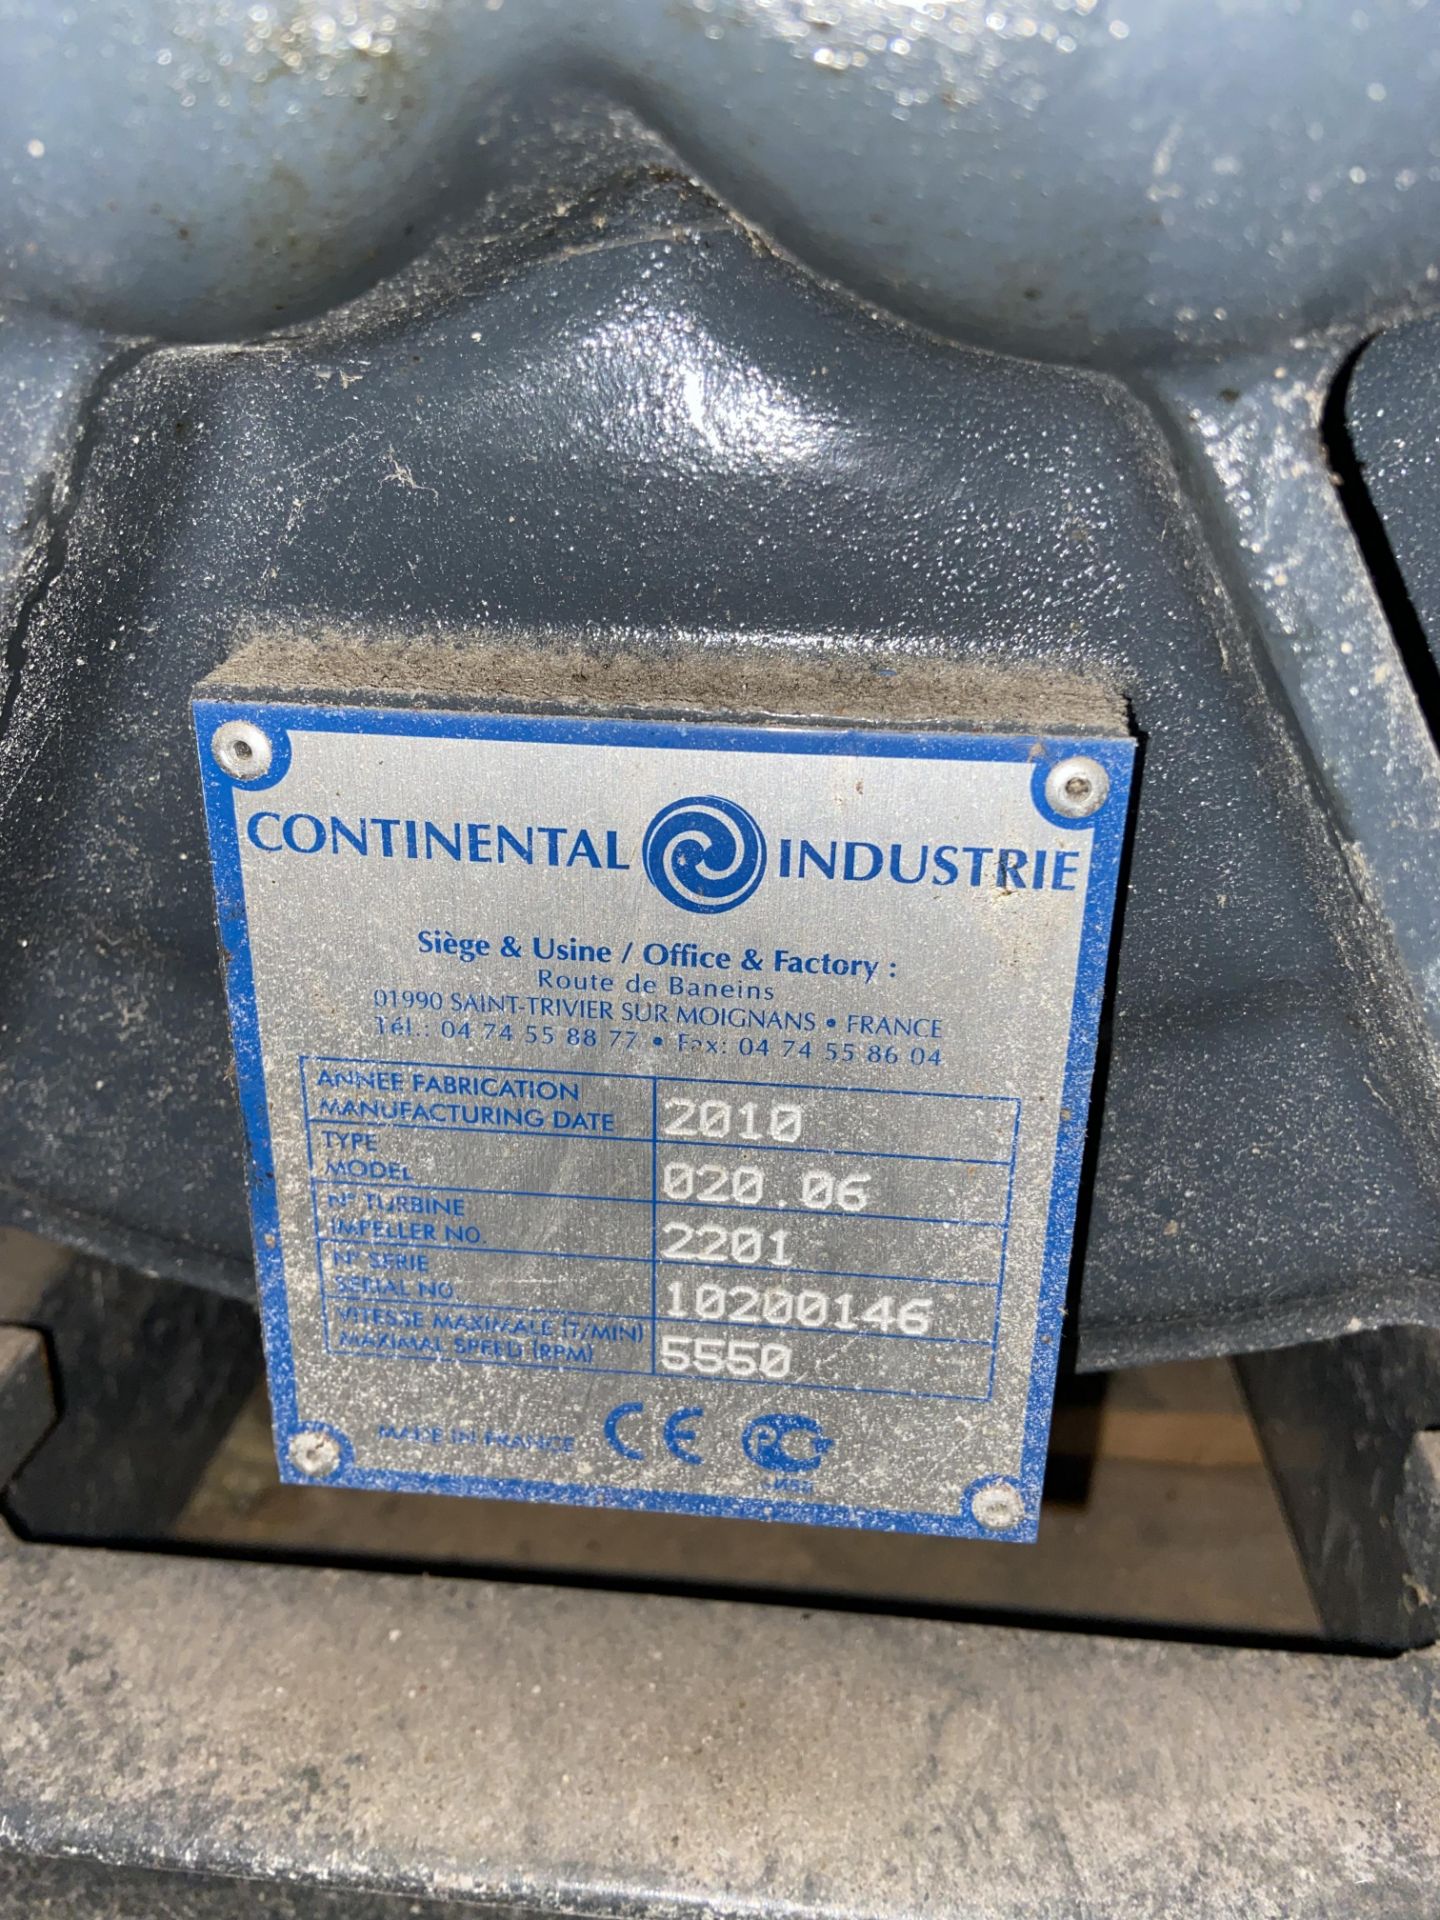 Continental Industrie 020 06 BLOWER, serial no. 10200146, with electric motor drive and base plates; - Image 3 of 3